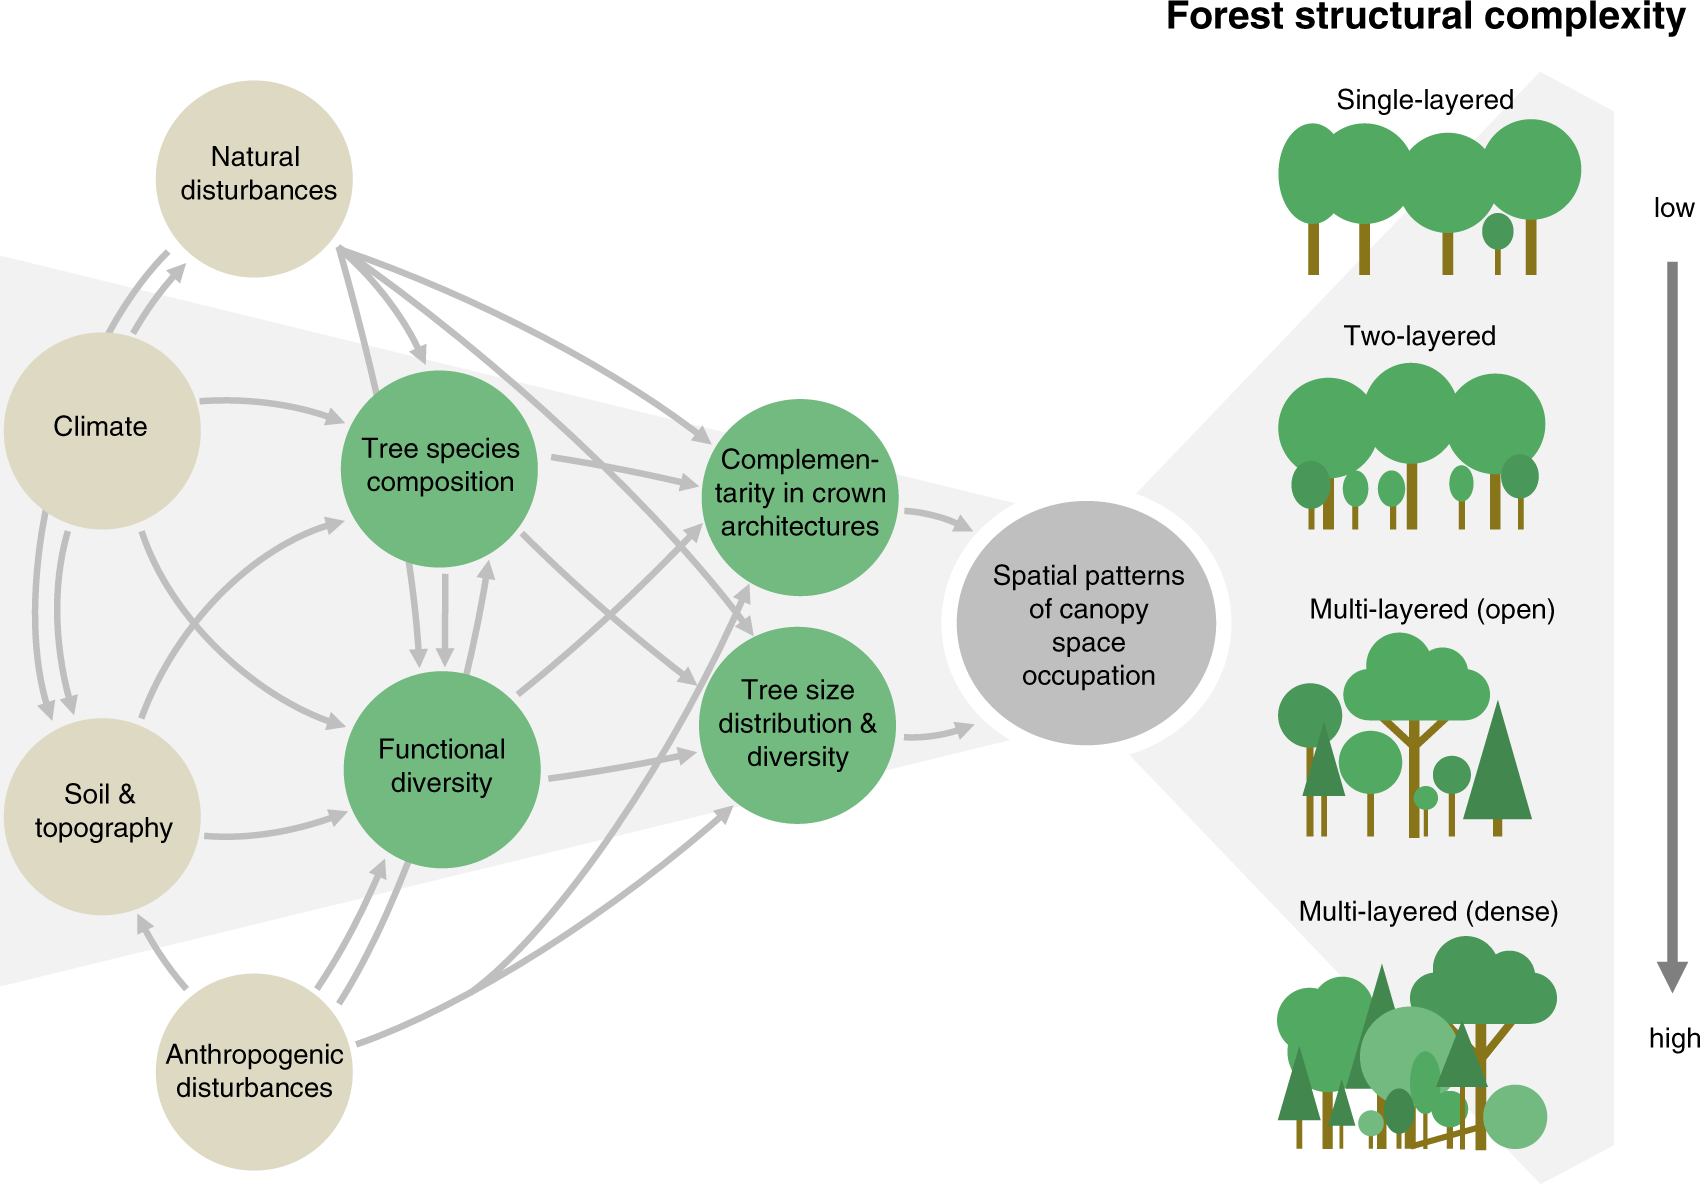 Global patterns and climatic controls of forest structural complexity |  Nature Communications